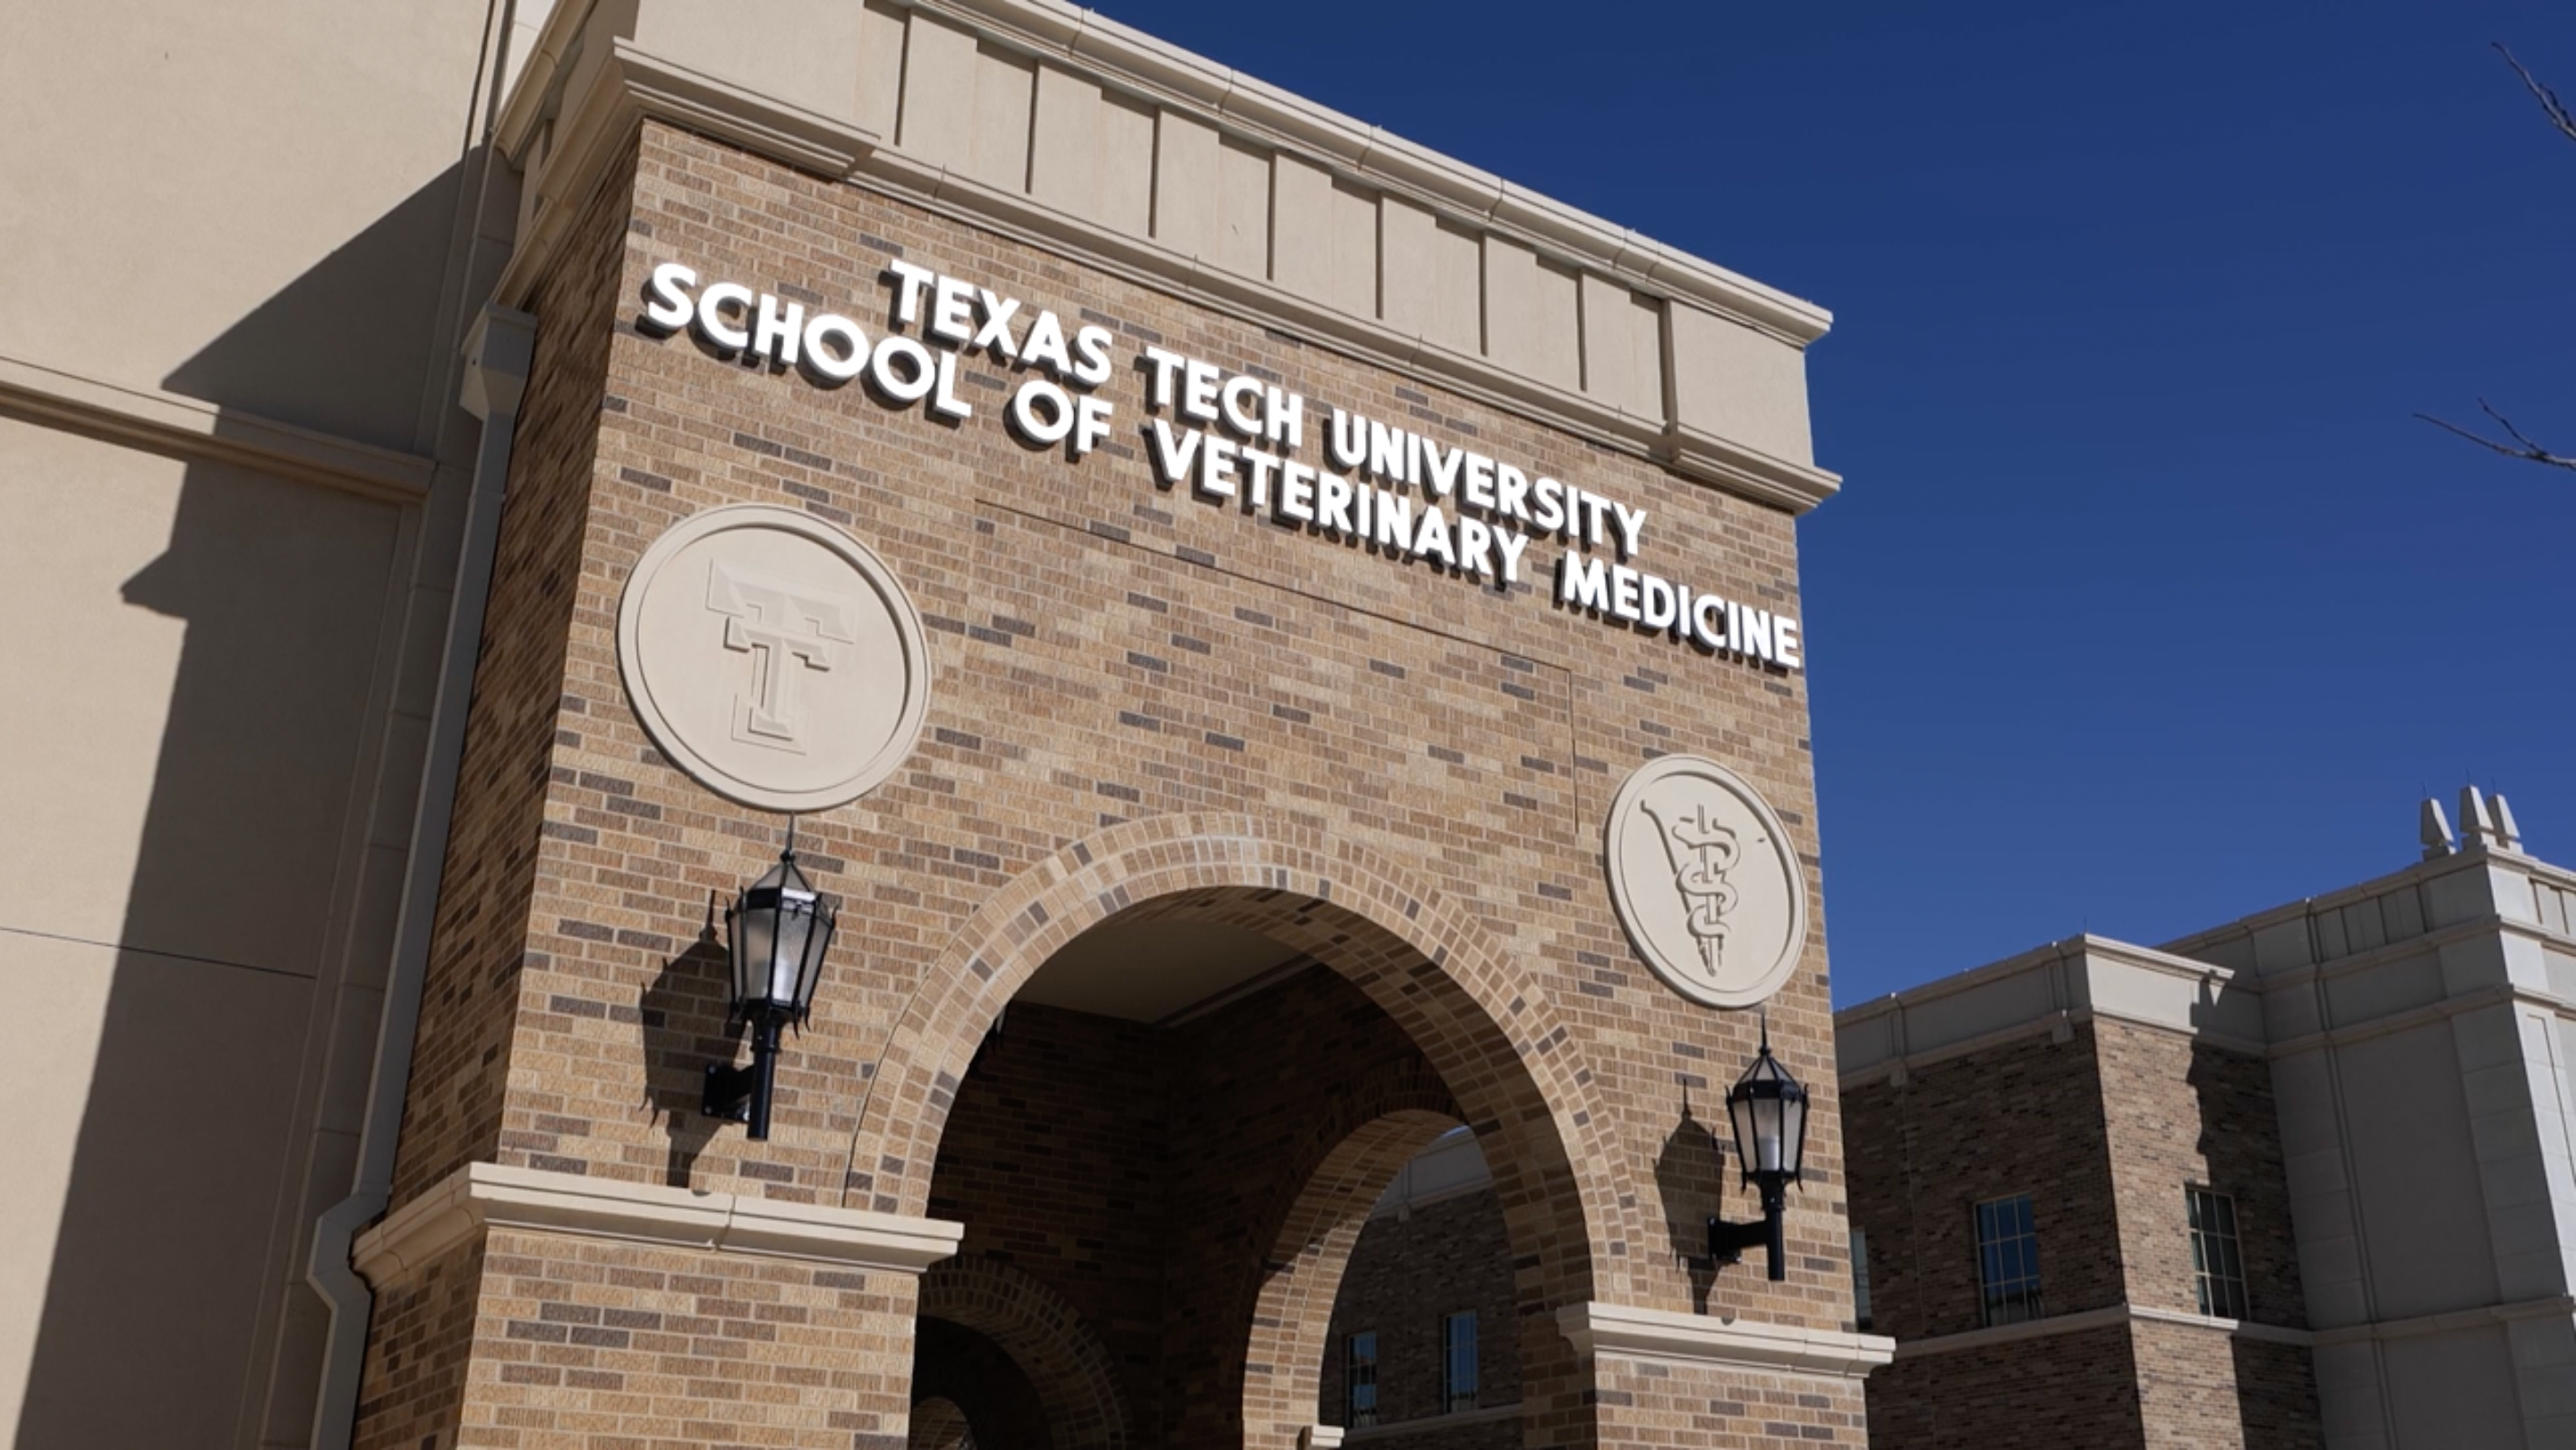 Image provided by Texas Tech University